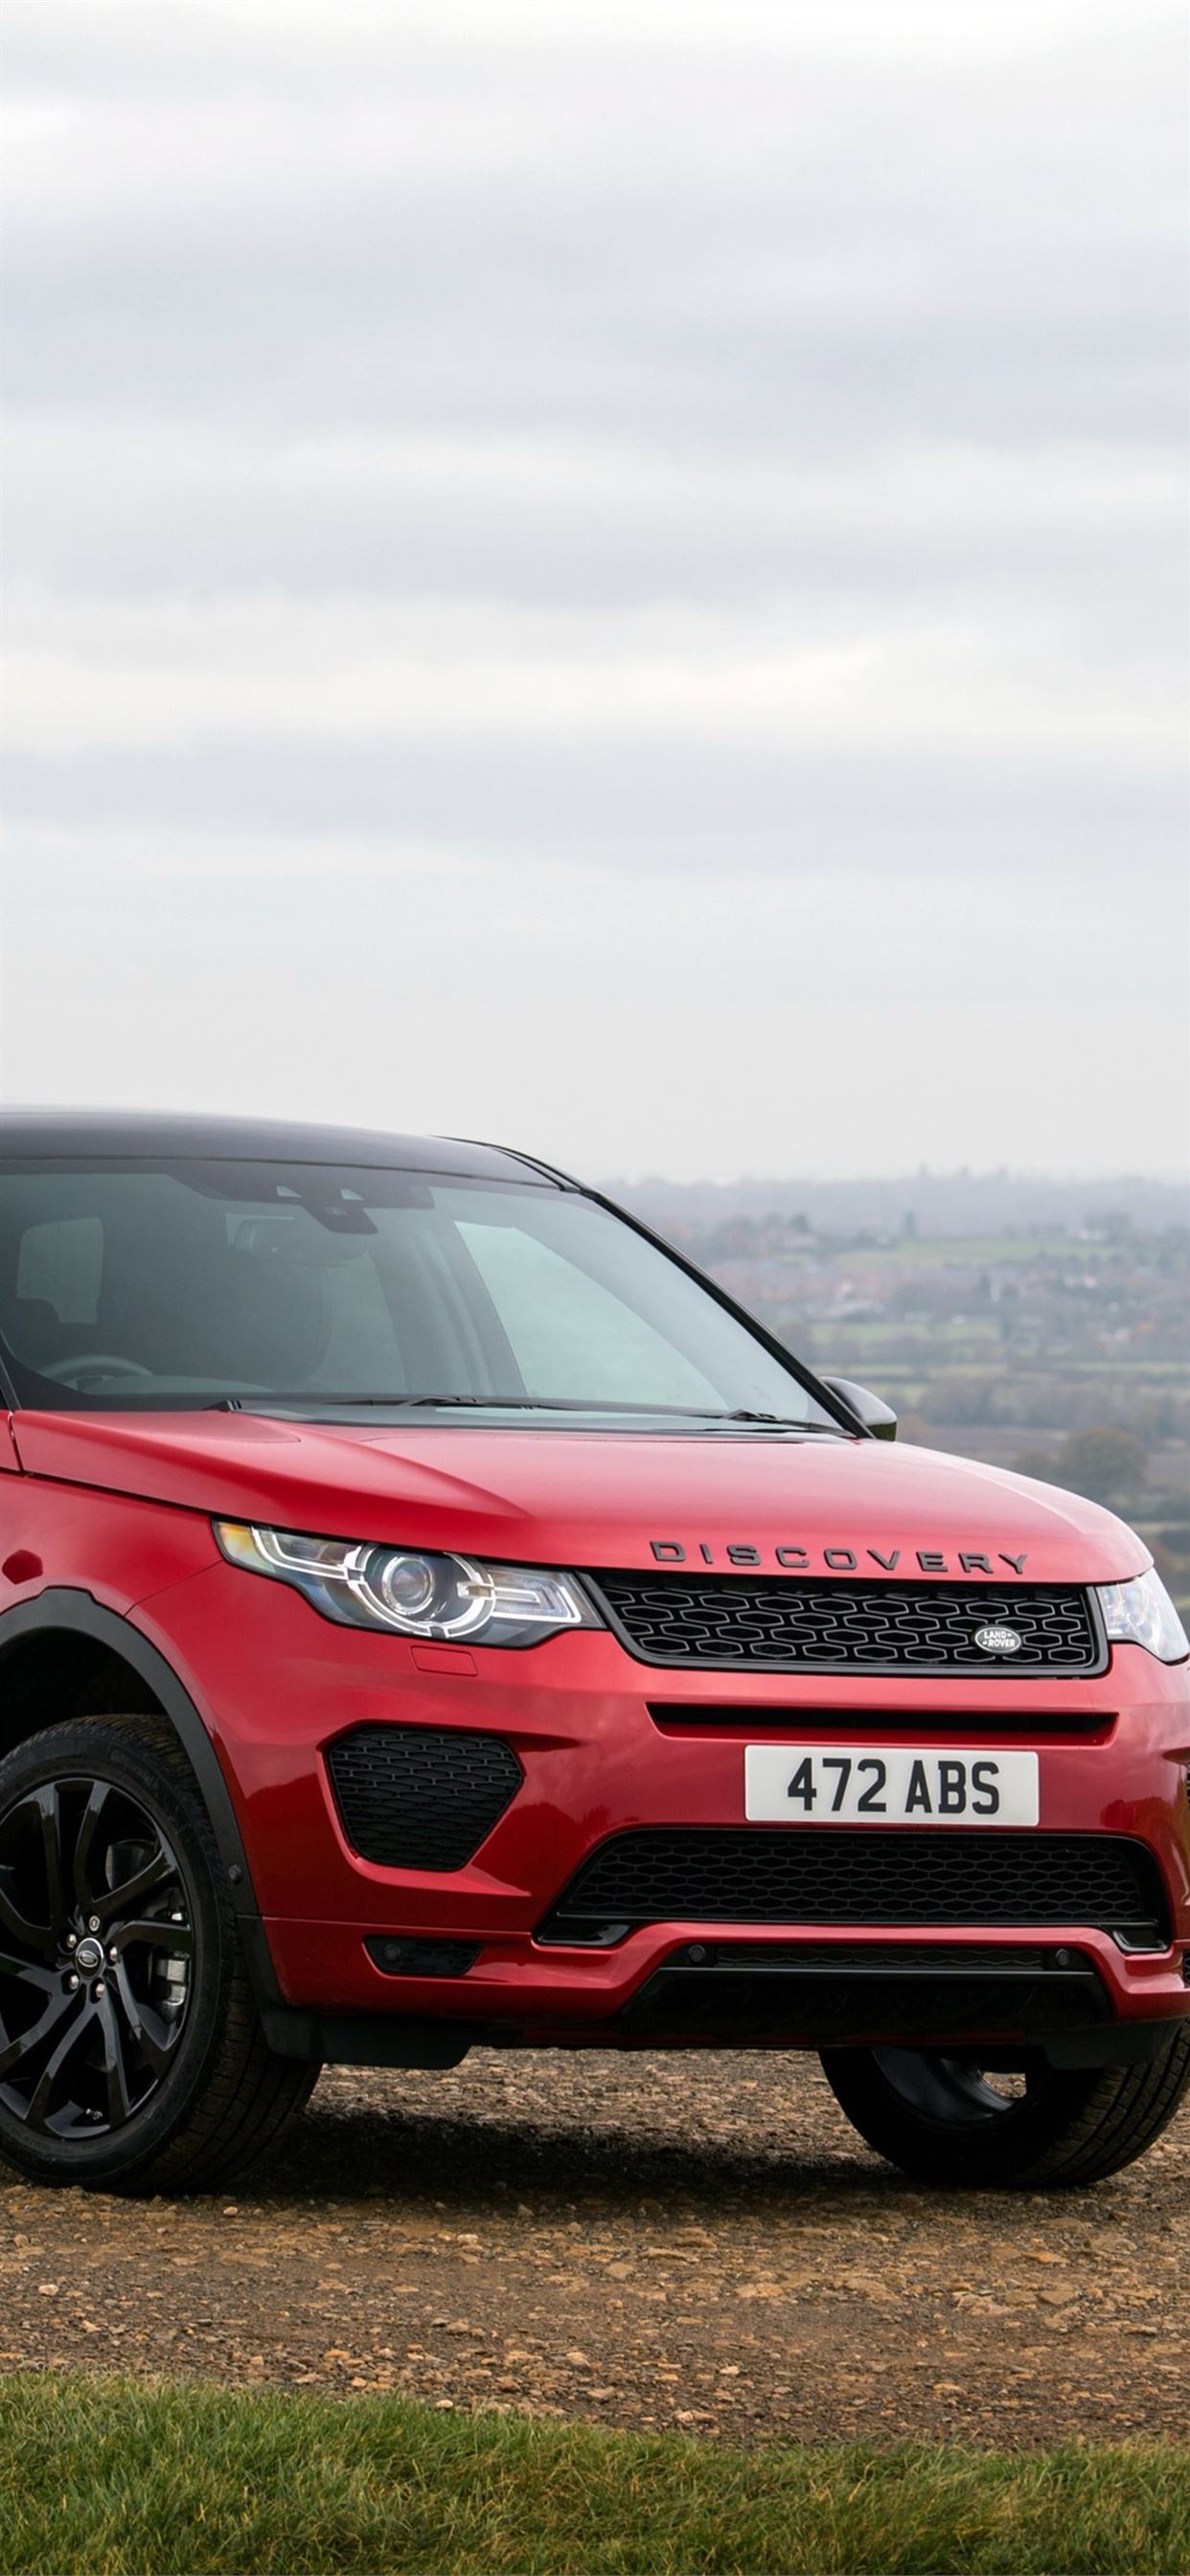 Land Rover Discovery sport, Stunning iPhone wallpapers, Adventure awaits, 1250x2690 HD Phone